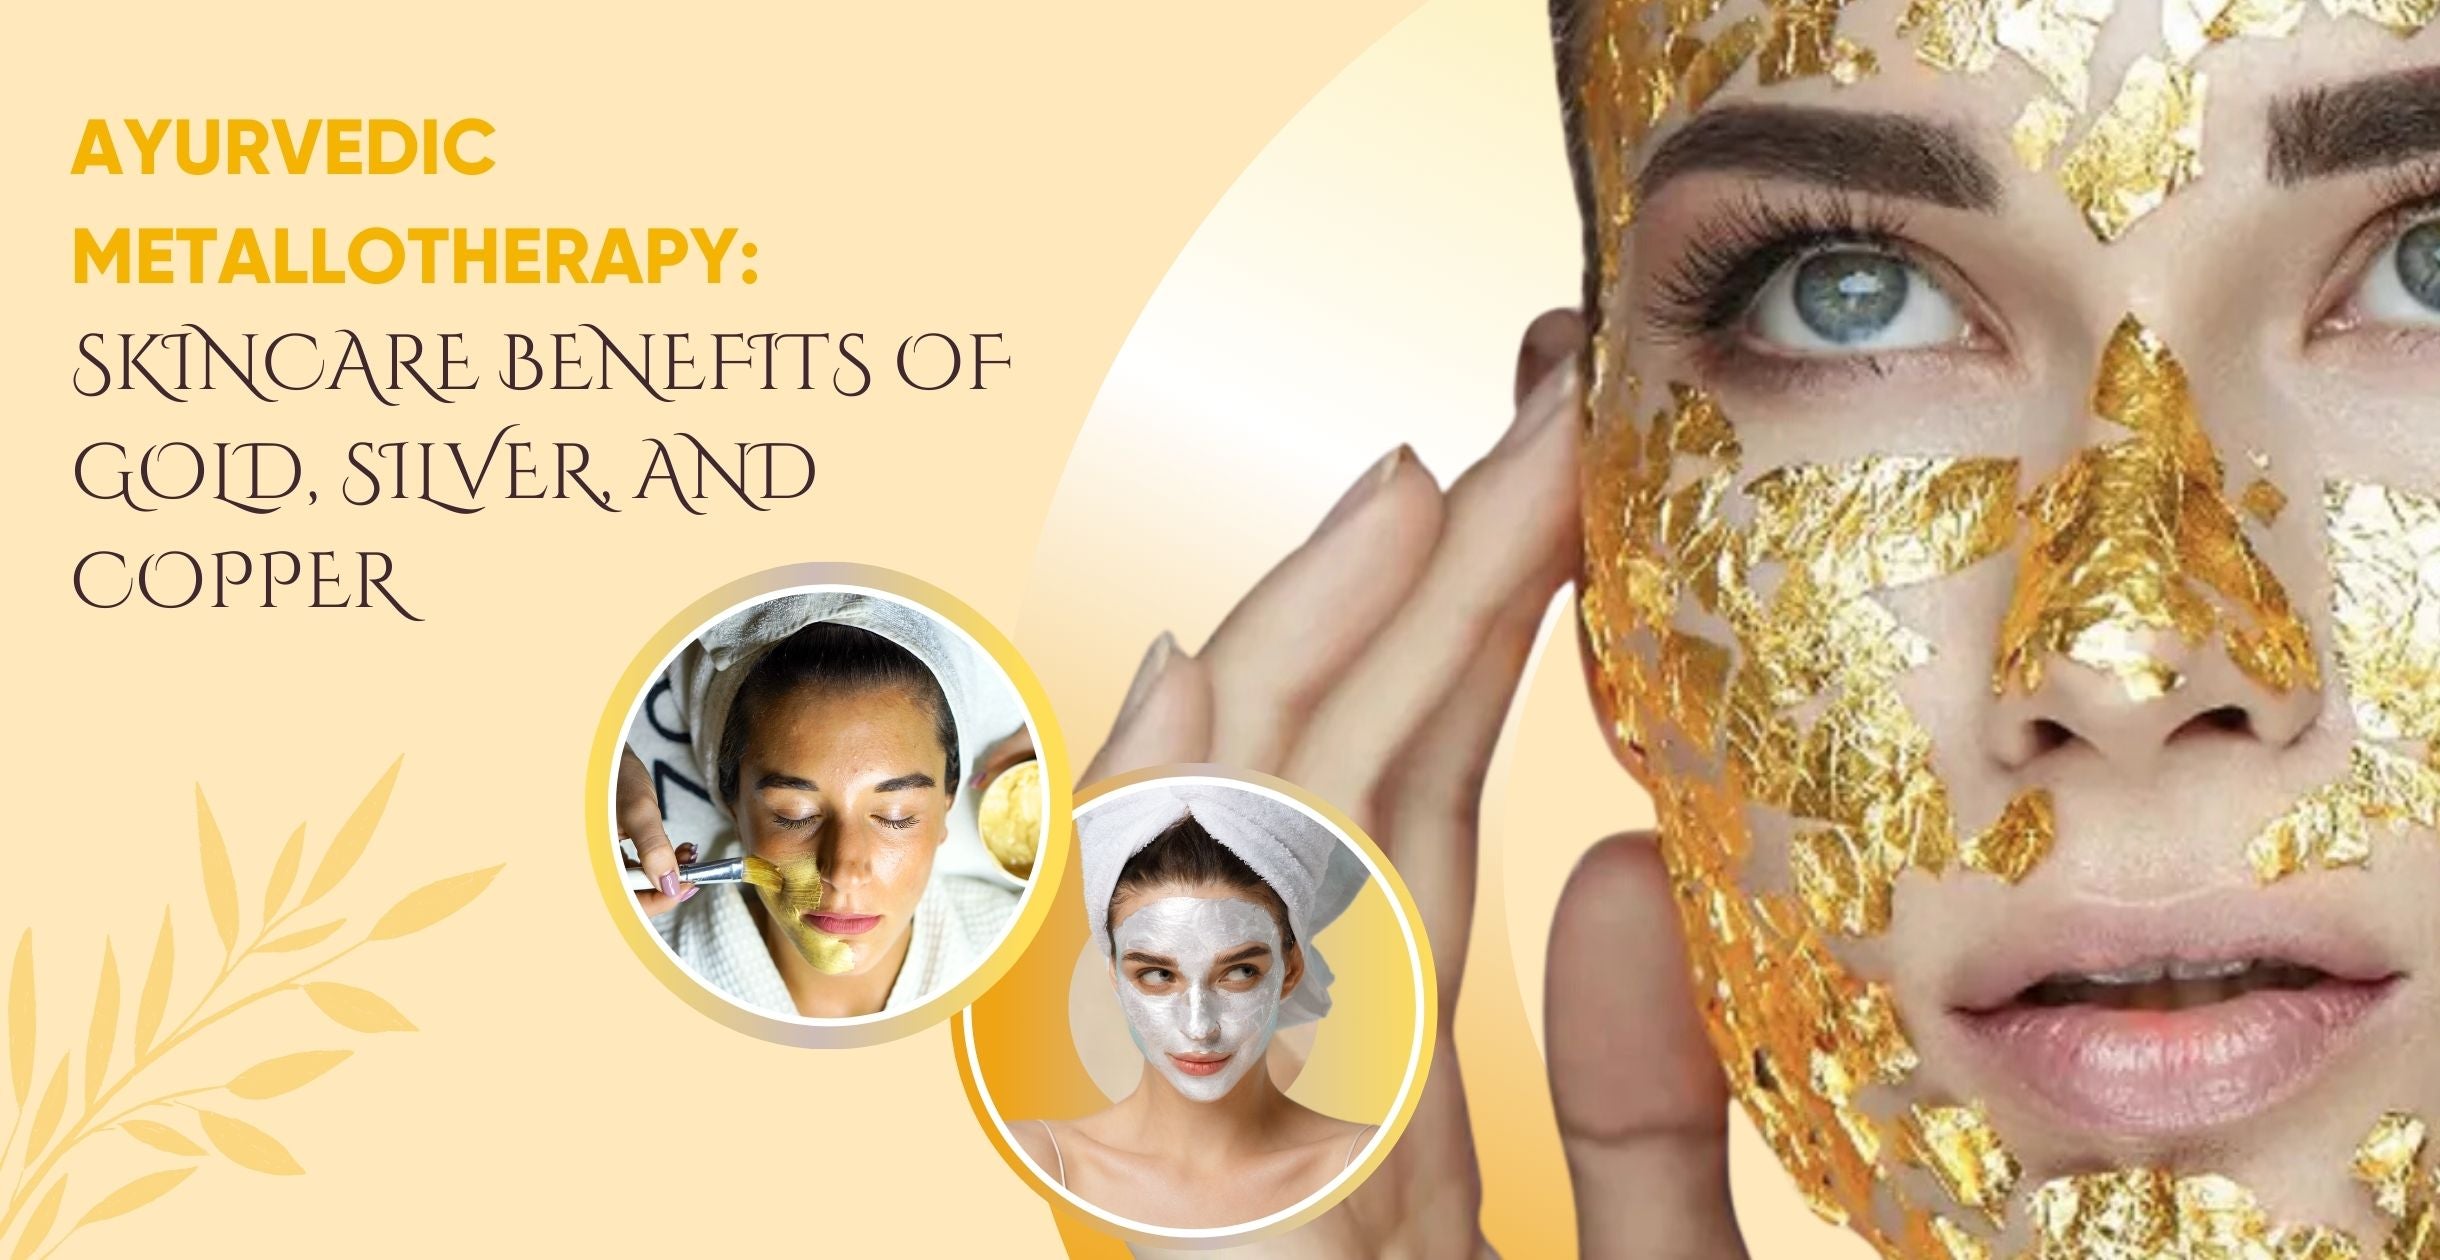 Ayurvedic Metallotherapy: Skincare Benefits of Gold, Silver, and Copper